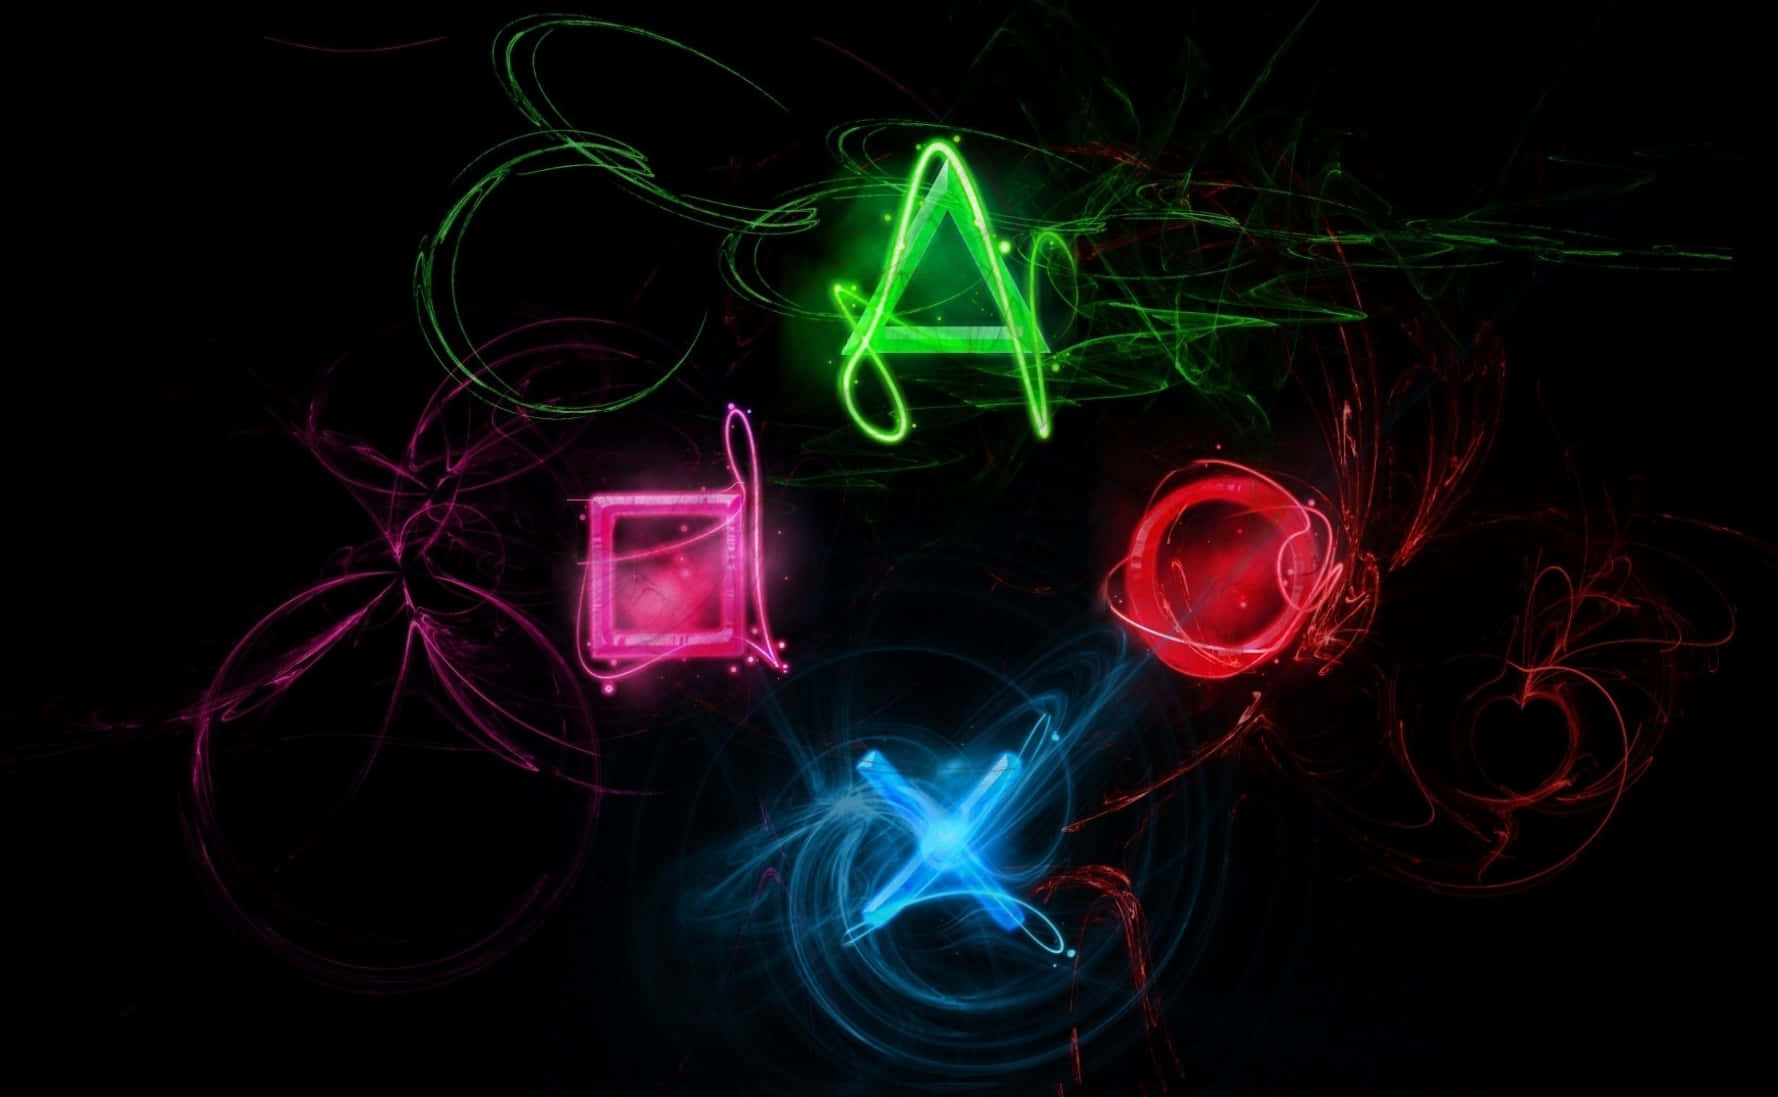 Take your gaming experience to the next level with this stylish PS4 theme. Wallpaper